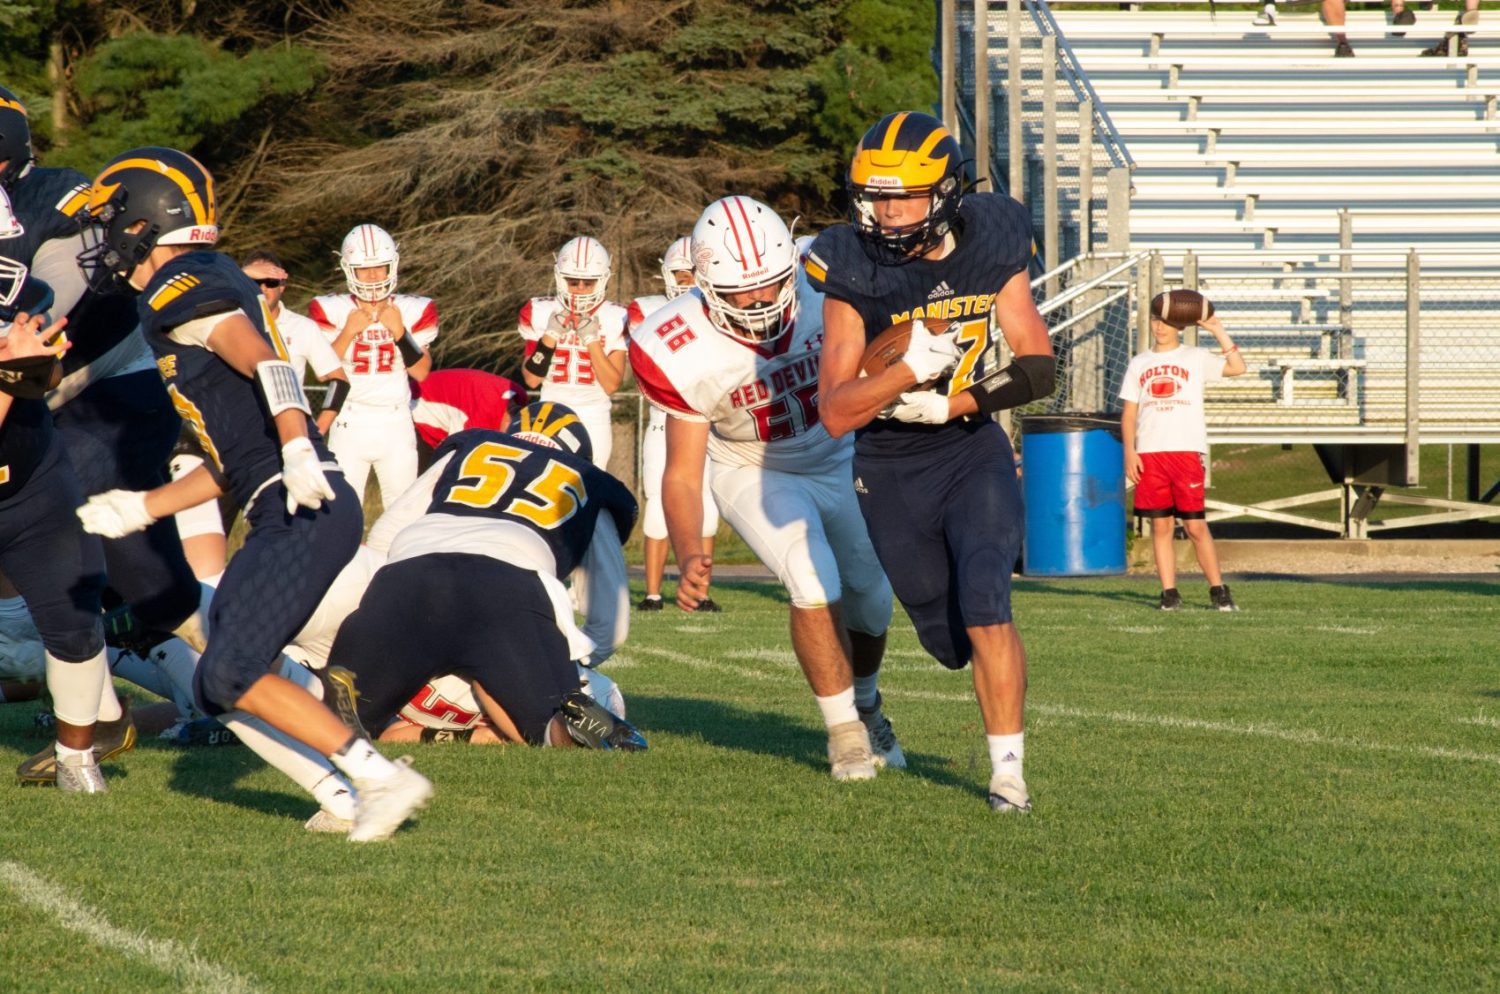 Manistee rushes for 338 yards cruises past Holton 54-6